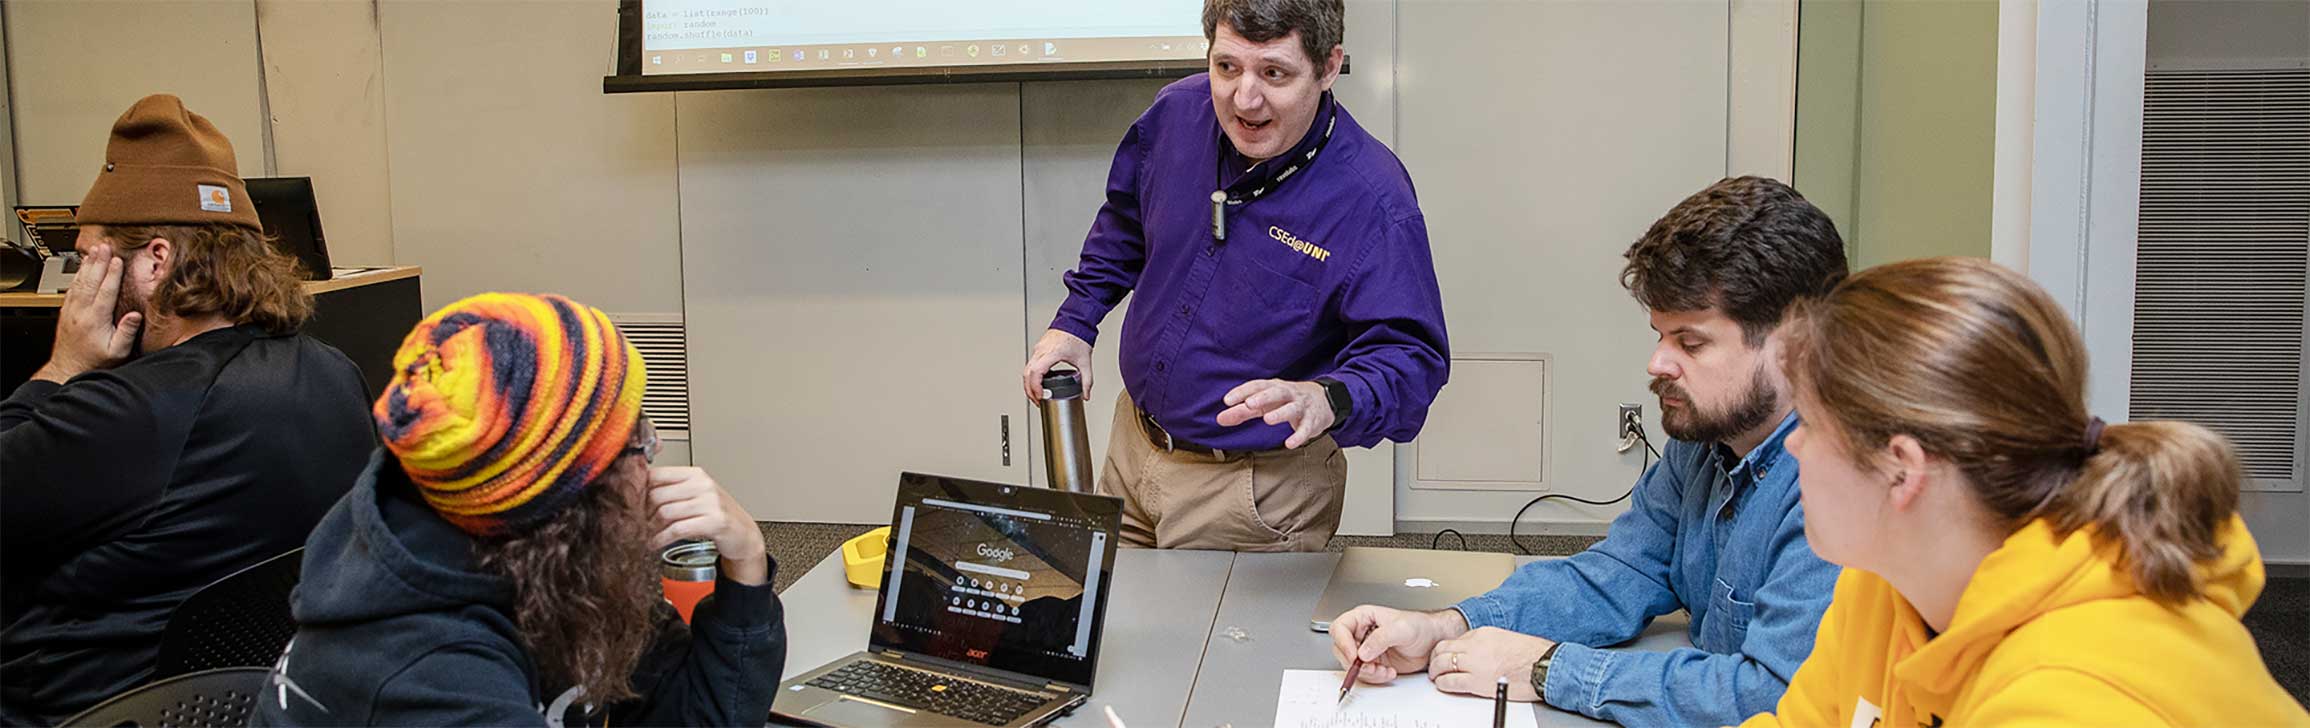 Professor showing code to students in a classroom.